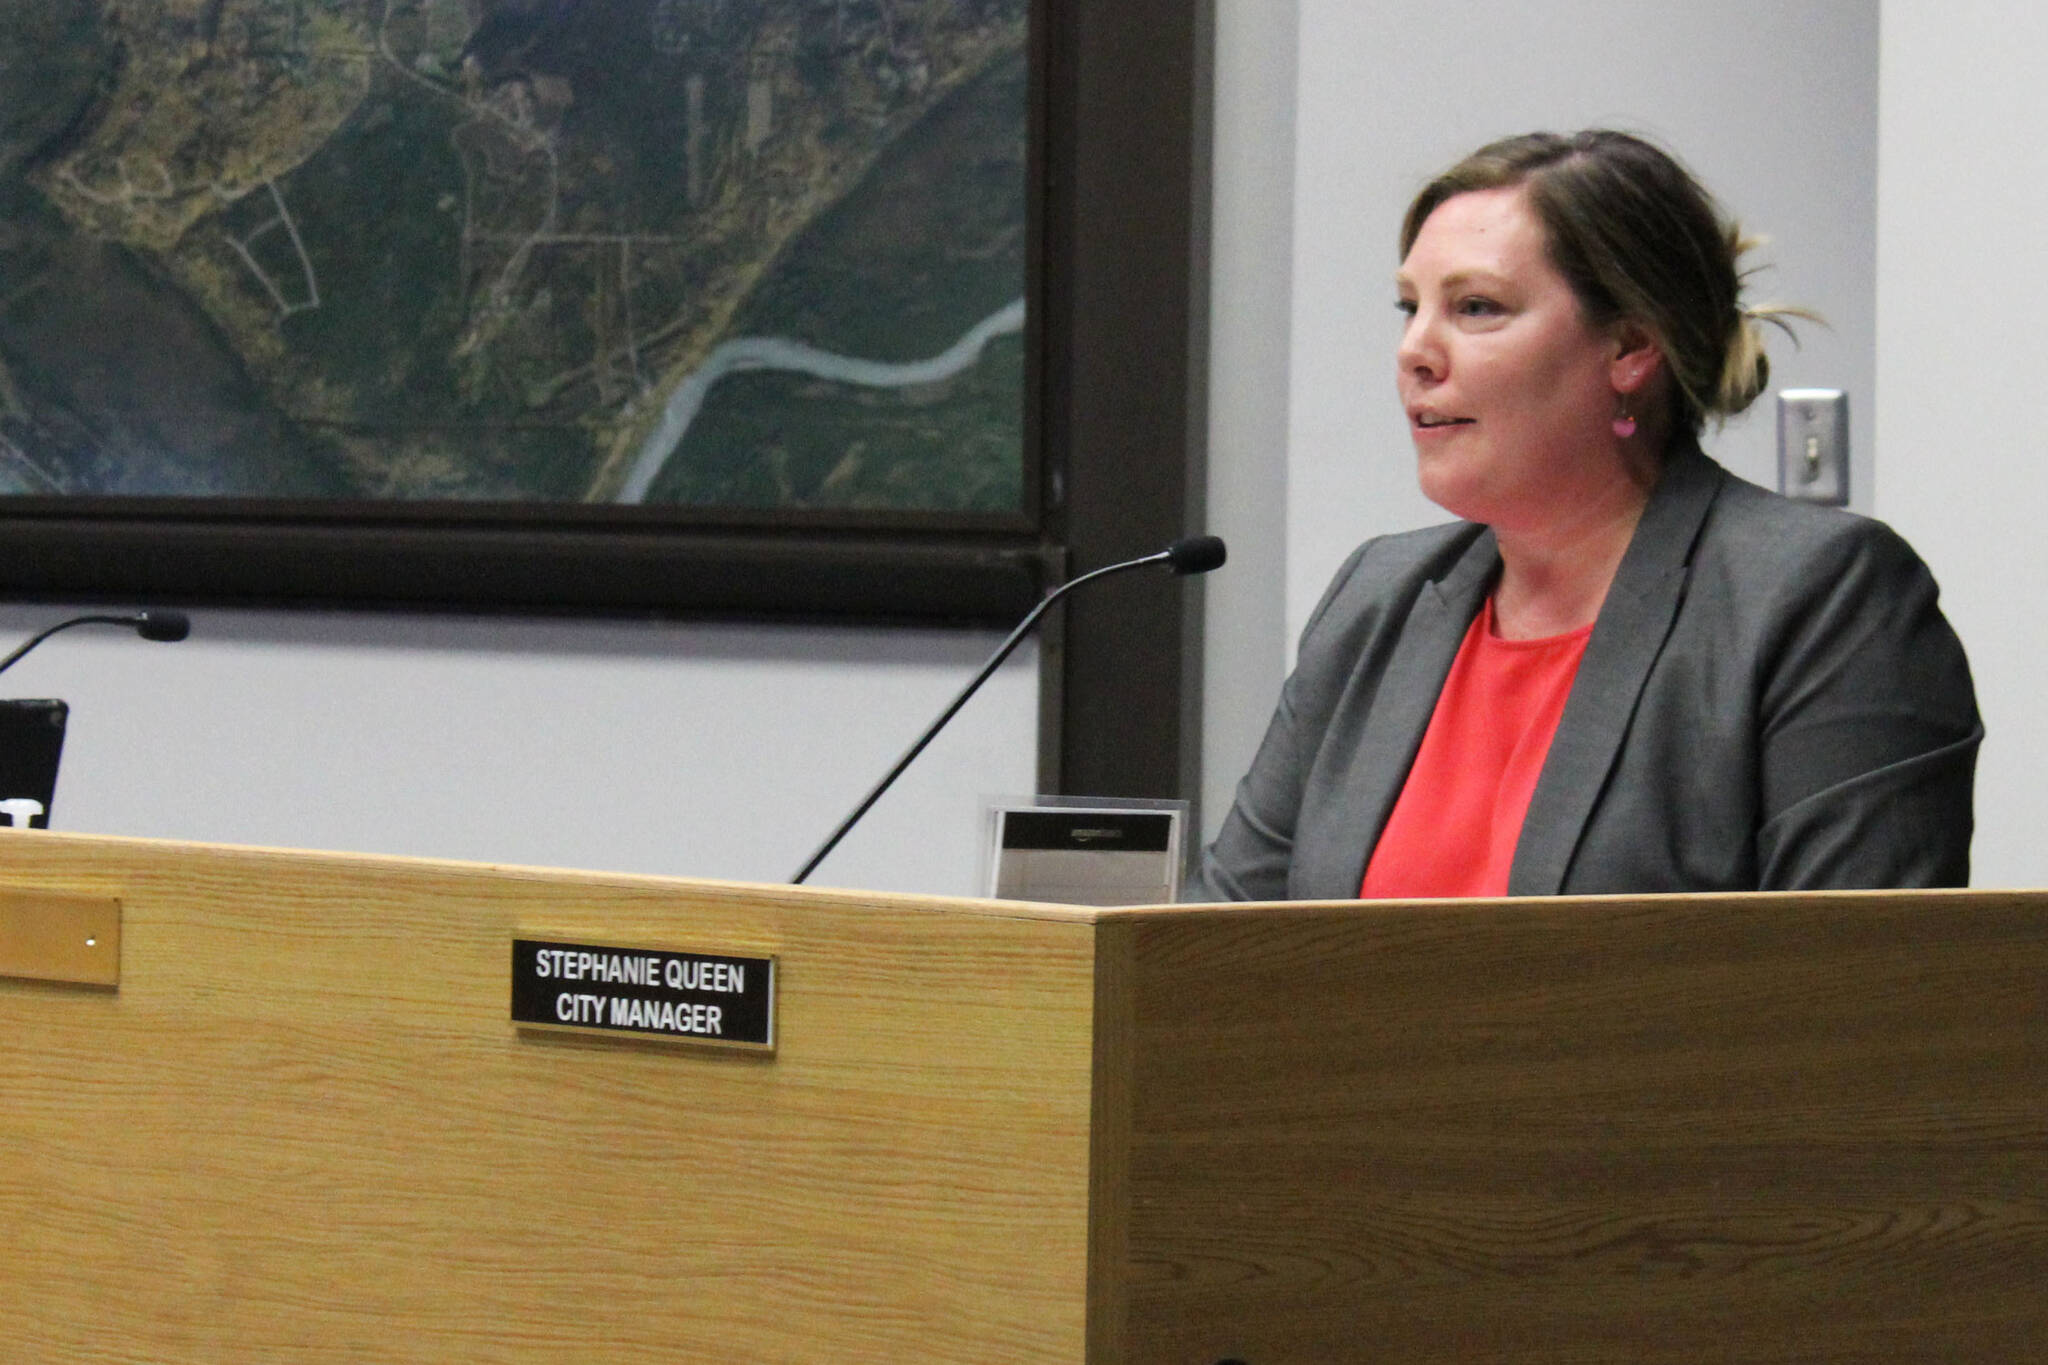 Soldotna City Manager Stephanie Queen speaks at a meeting of the Sodotna City Council on Wednesday, June 23, 2021, in Soldotna, Alaska. Queen announced in November that she will not be renewing her contract with the city, which expires on Feb. 28, 2023. (Ashlyn O’Hara/Peninsula Clarion)